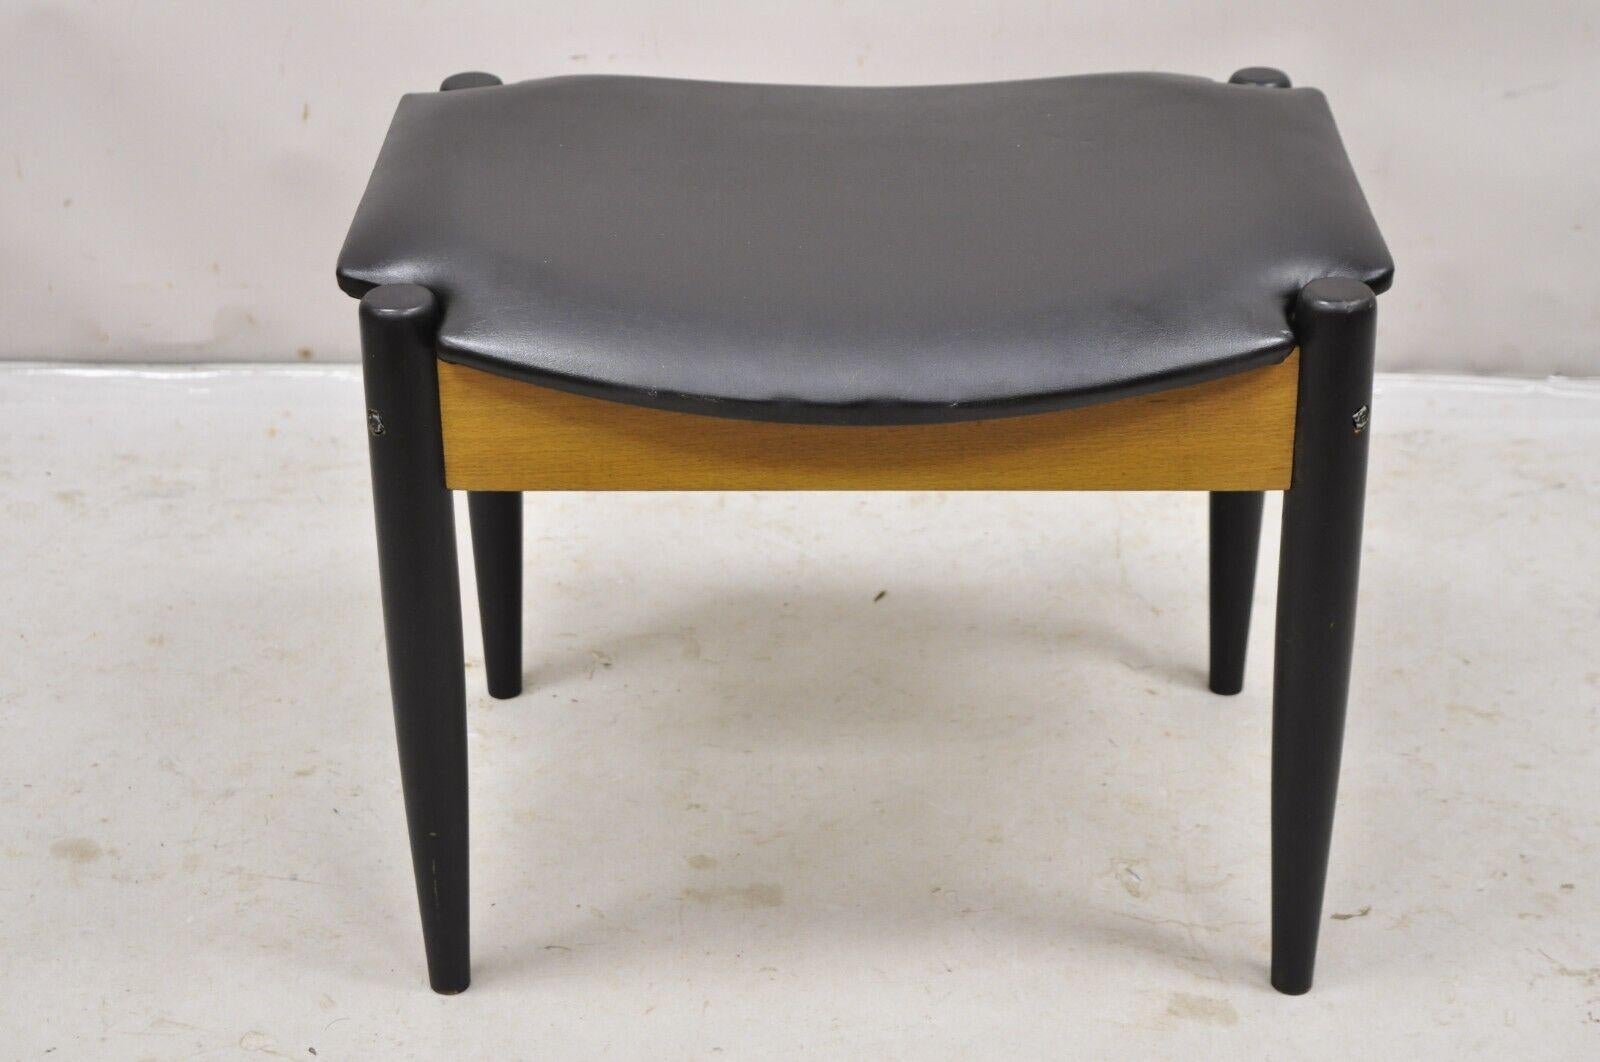 Norco Mid Century Modern Sculpted Footstool Ottoman with Tapered Legs and Black Vinyl Seat. Circa Mid 20th Century.
Measurements: 16